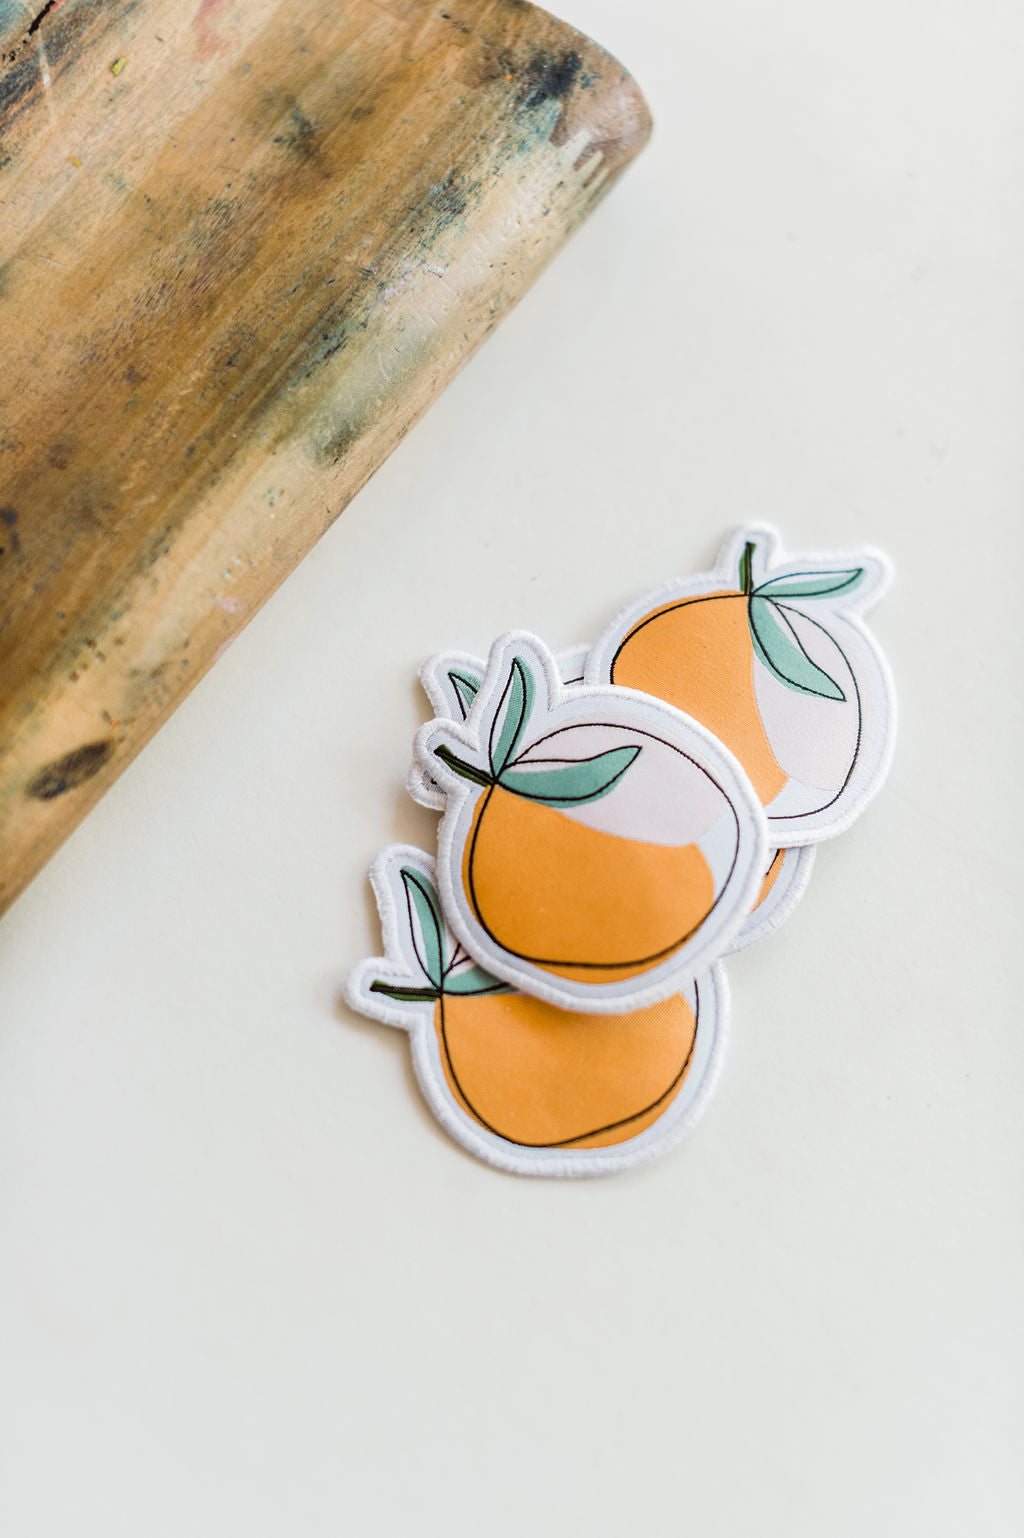 So many possibilities + ways to use these Ramble & Co. patches. multi-color hand illustrated peach the color: peach, pink, white, black and green approx. 2" x 2" To apply: Each patch is woven with an iron on backing. Ramble & Co. is a family owned business. Shop at shop.rambleandcompany.com or visit our store in Wichita Falls, Texas || small batch/ hand printed tees + fine art prints | your source of encouragement + inspiration.